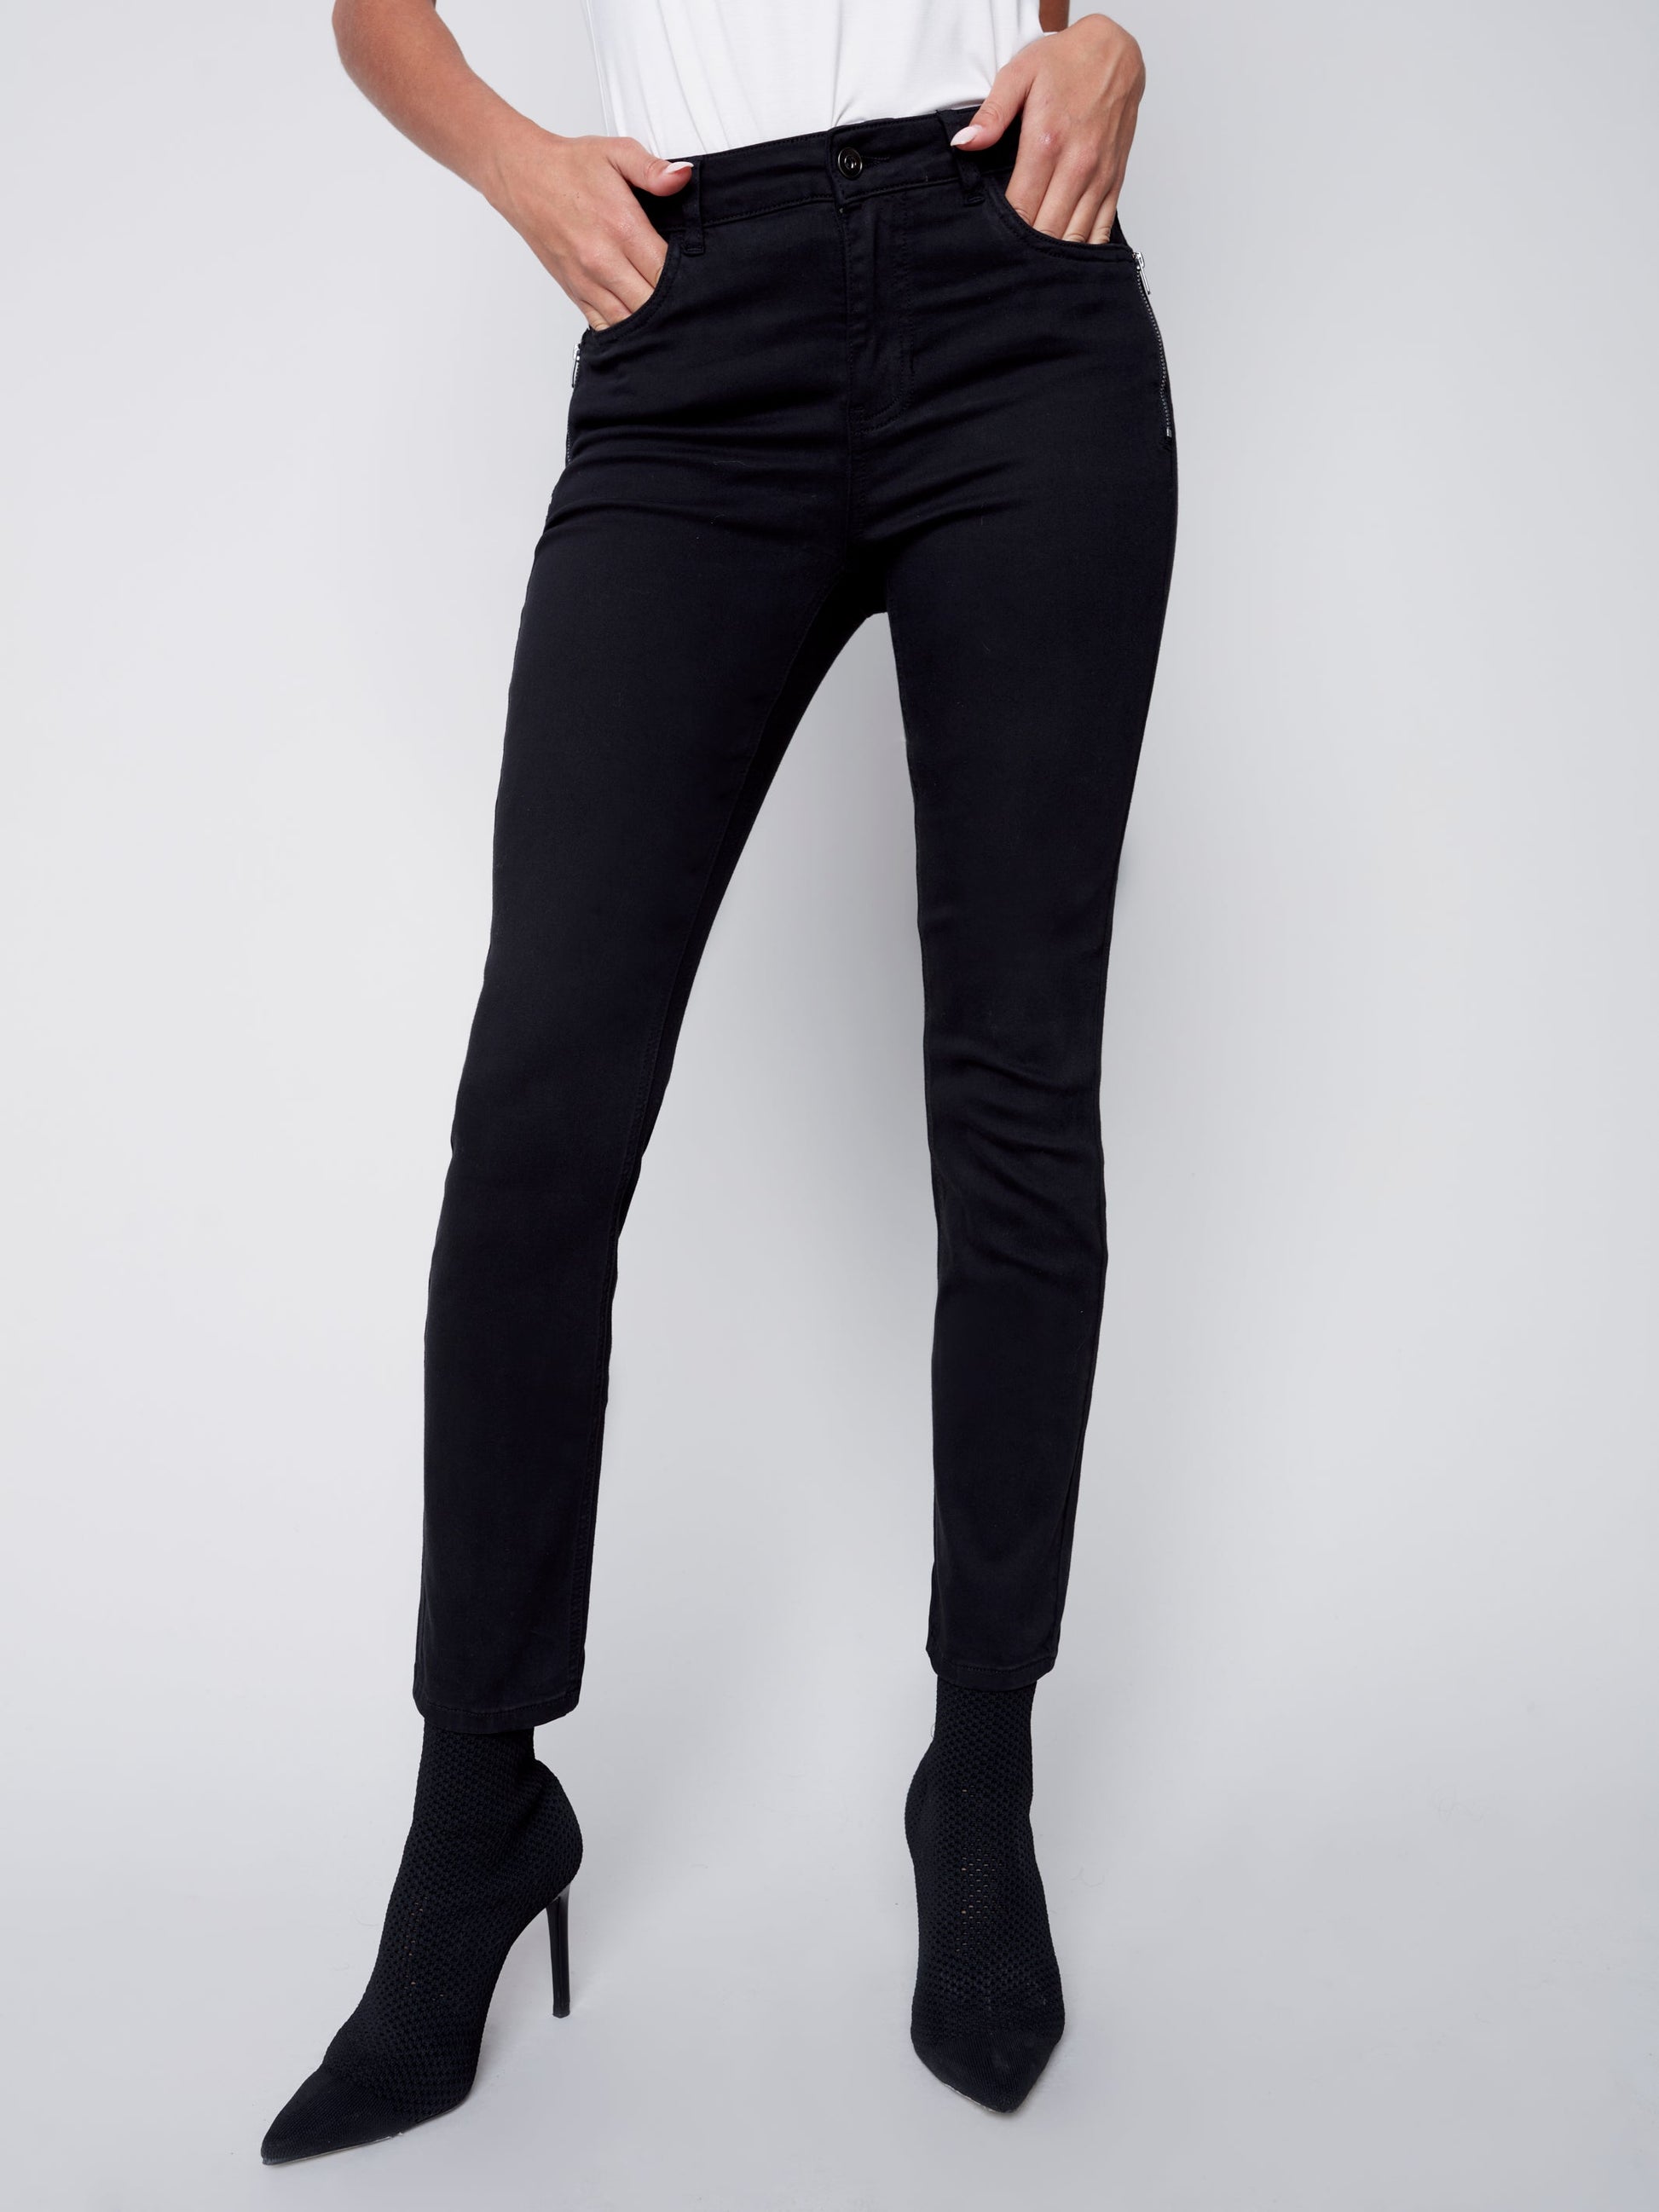 Eloise Boot Cut Jeans – Strike The Pose